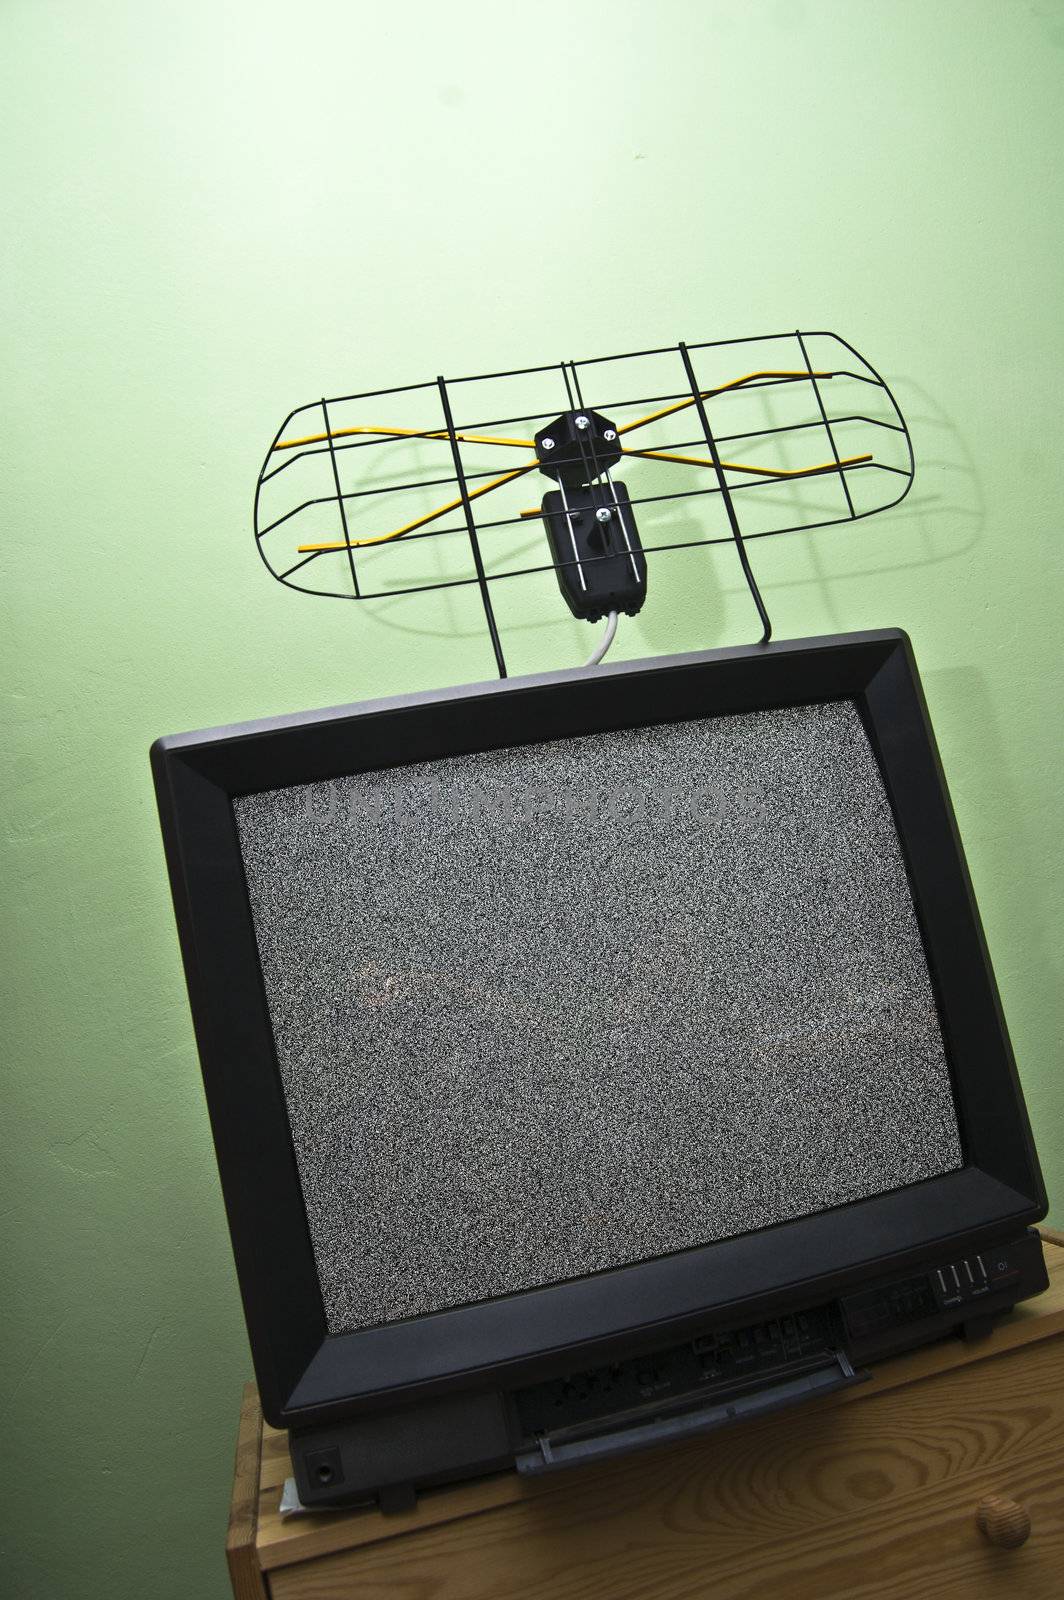 Old TV set, noisy picture, aerial. by photocreo